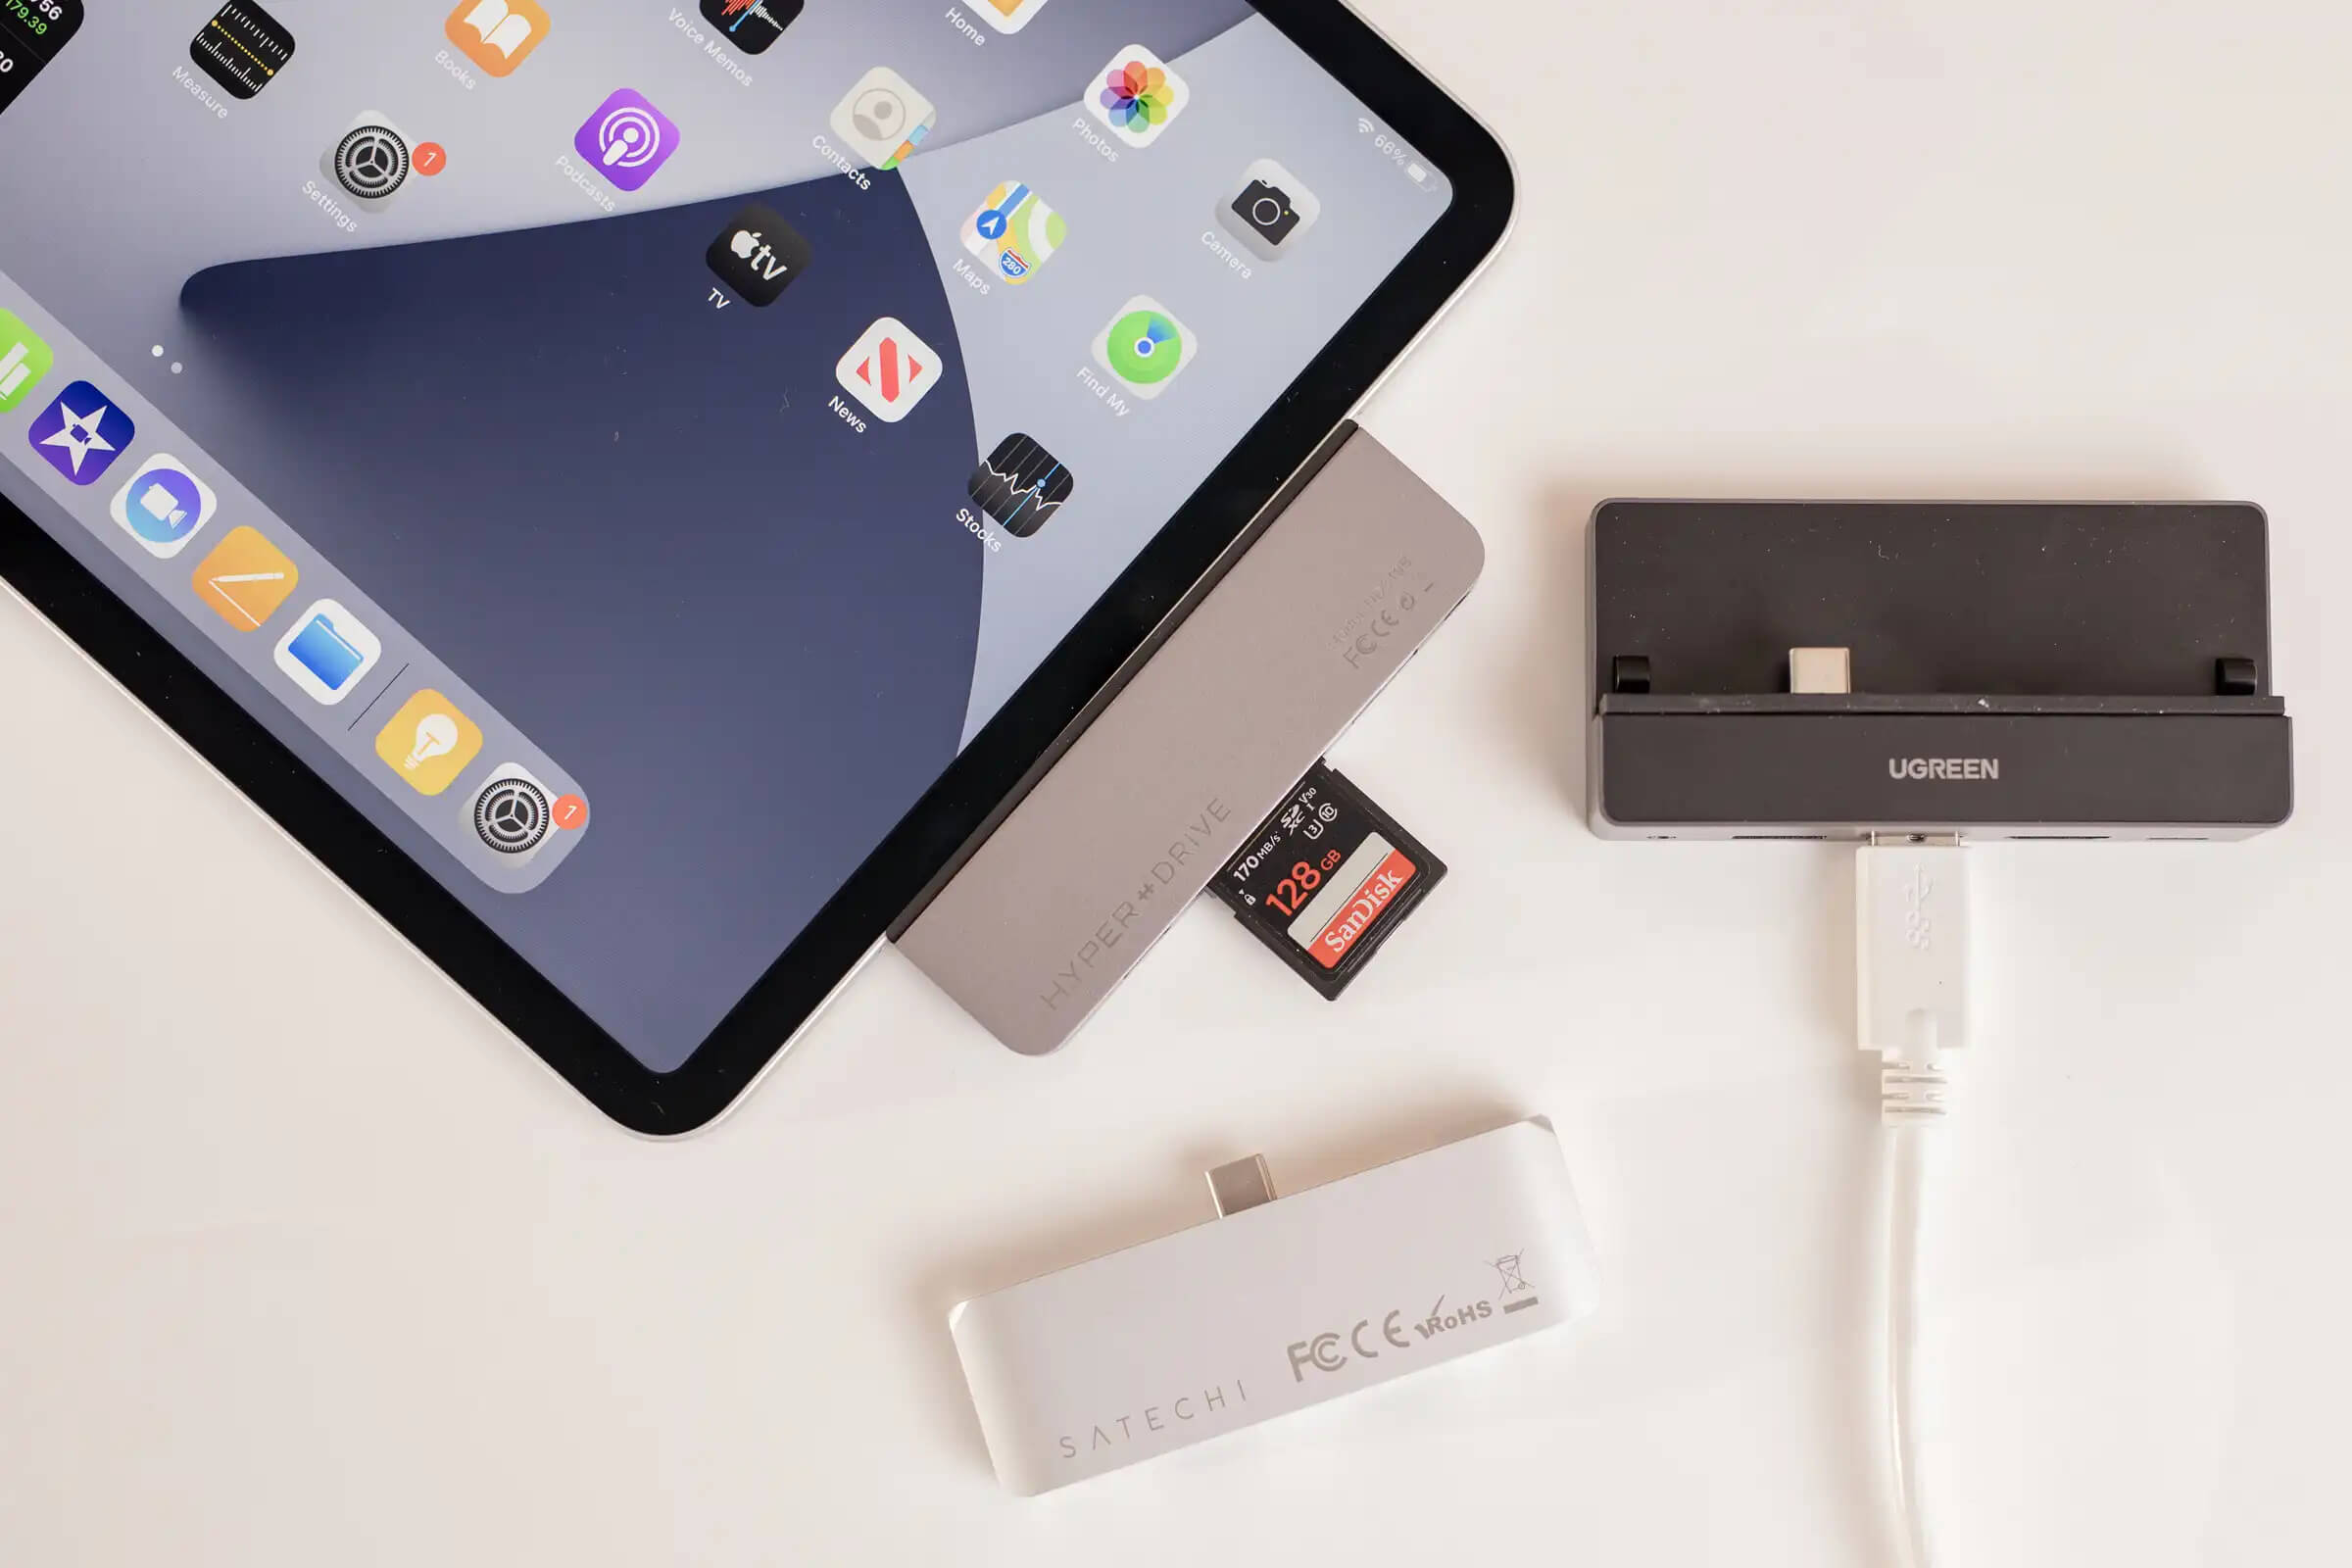 How To Transfer Photos From My Tablet To Sd Card